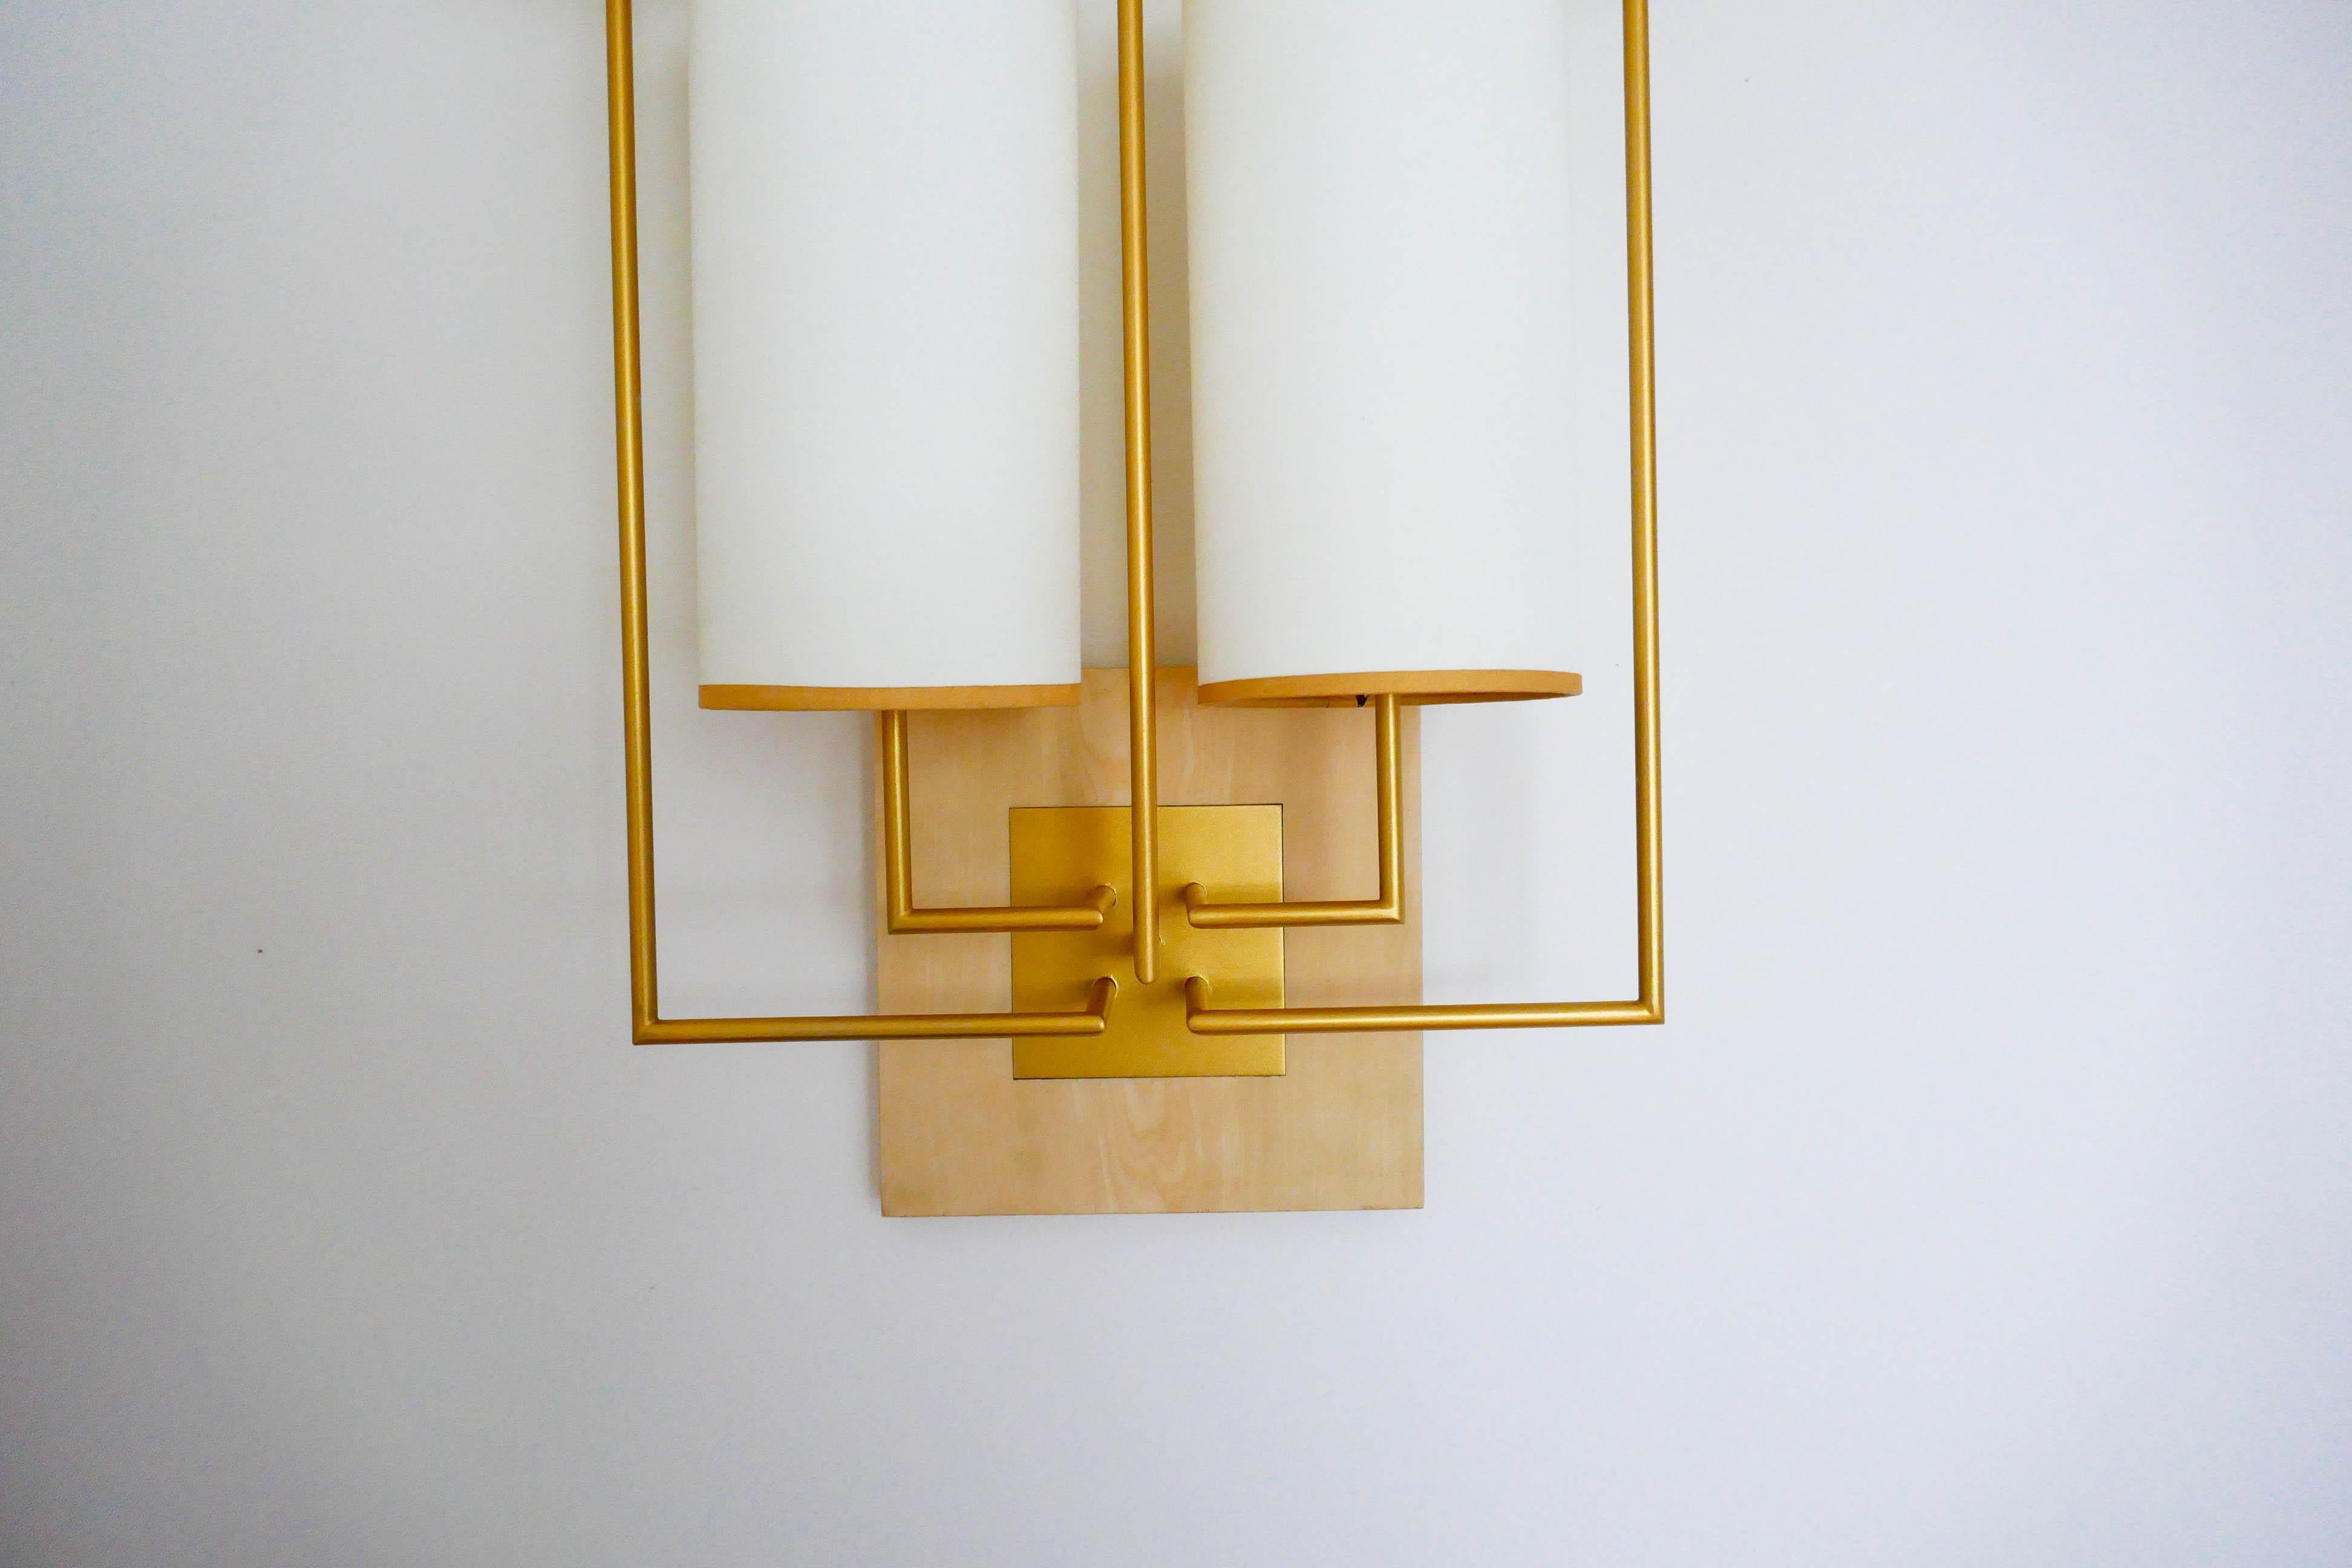 Pair of Wall Lamp Sconce in Gold Patina and White Fabric Lamp Shades For Sale 2